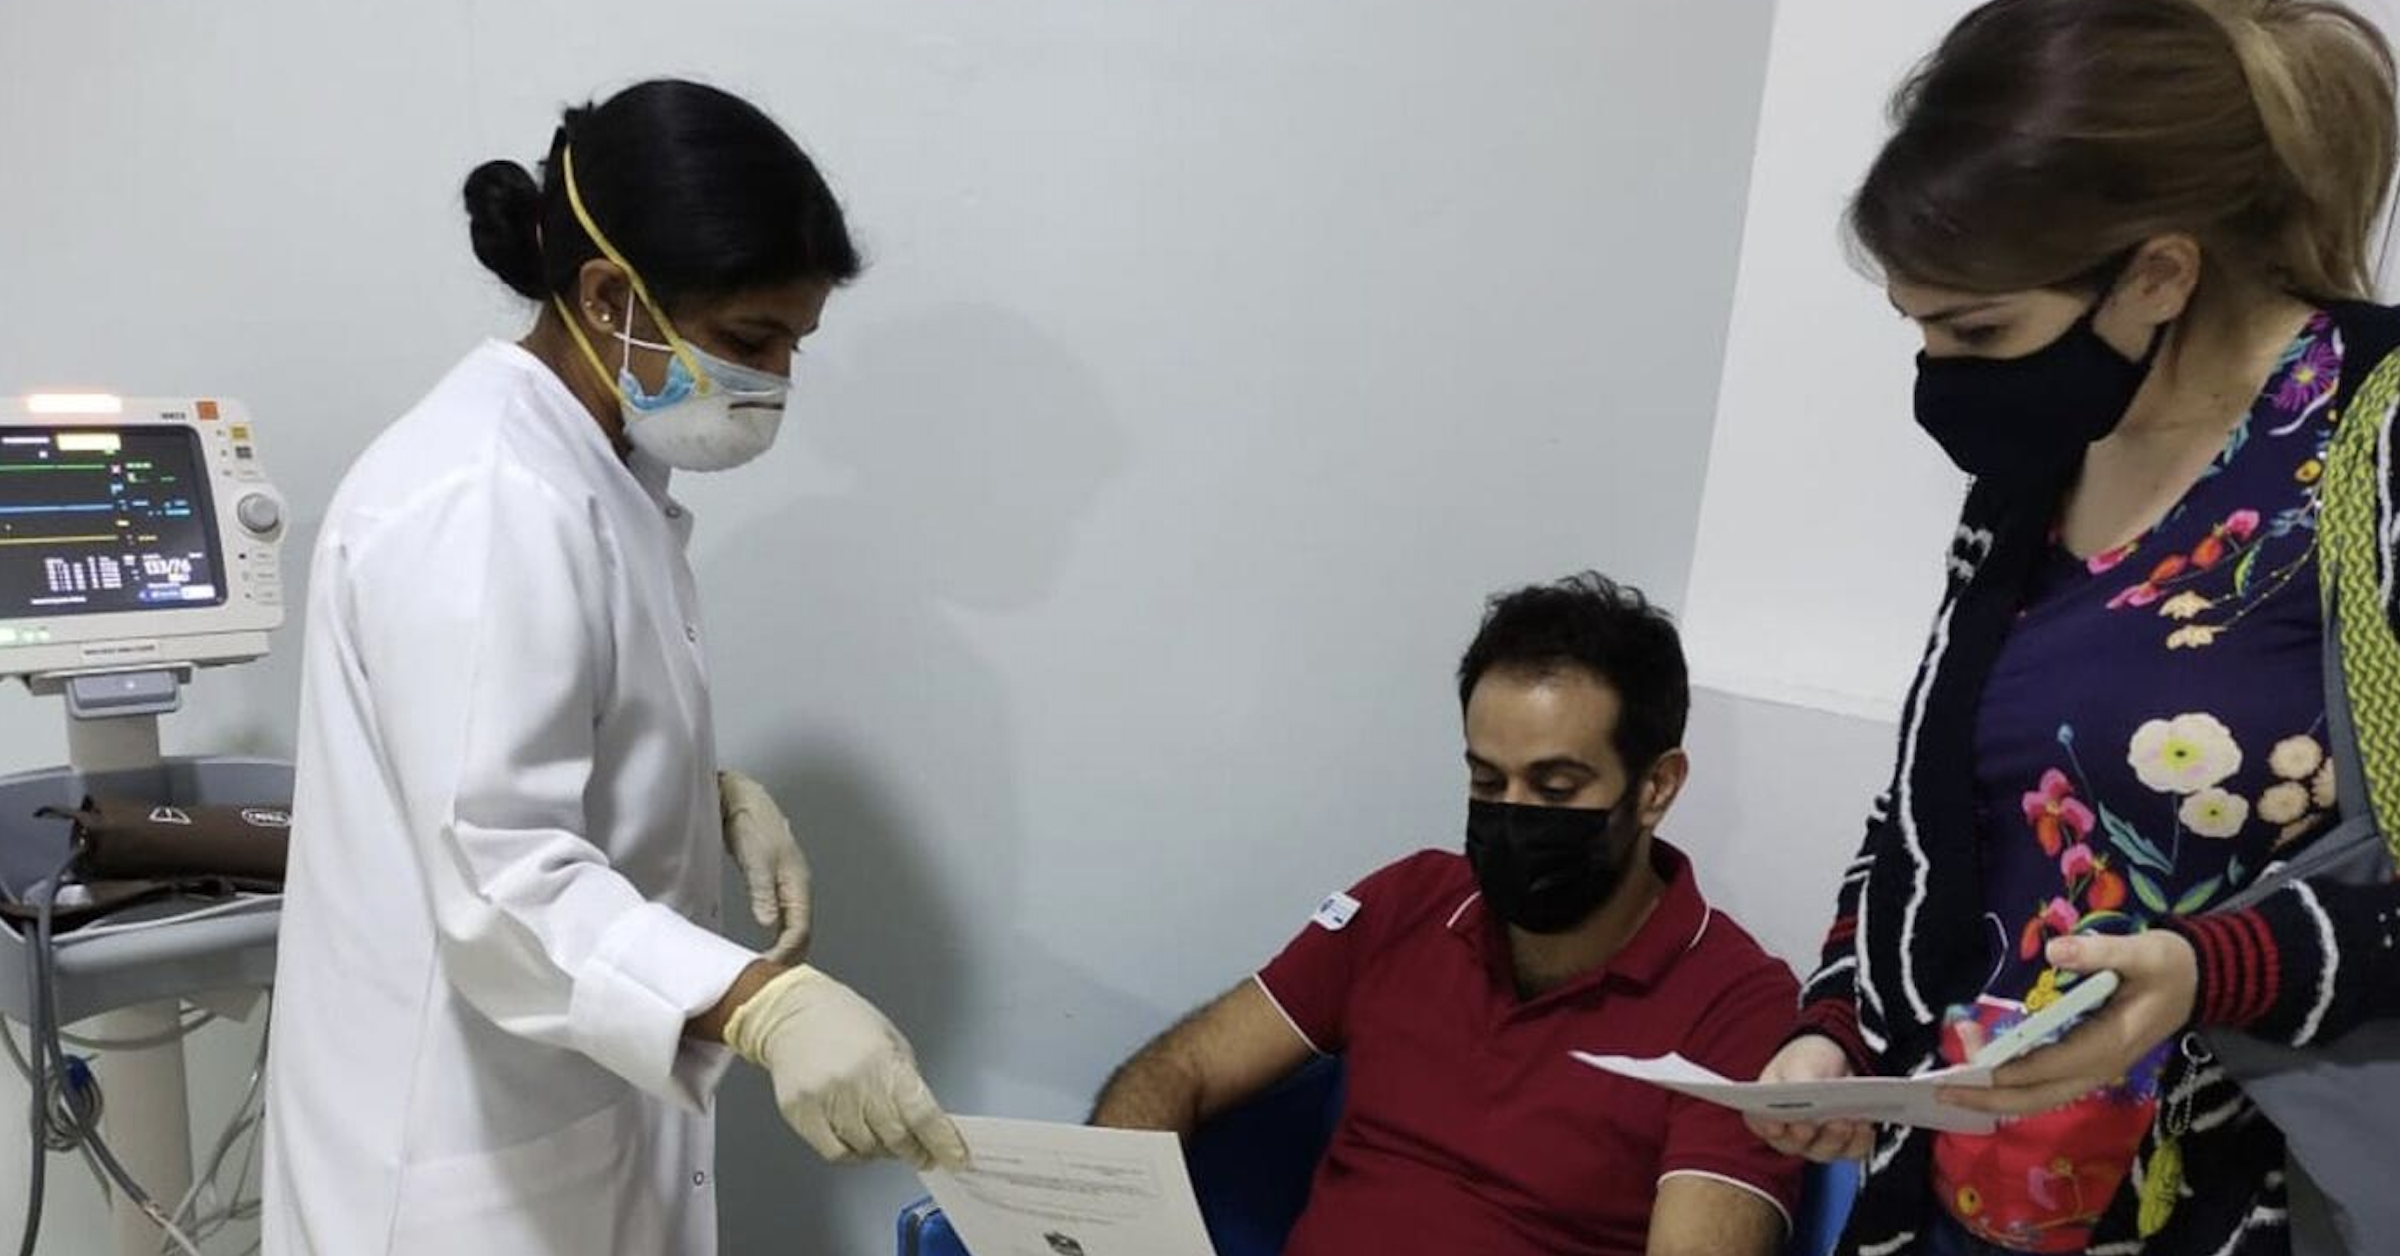 Rising Covid cases in UAE: Daily infections cross 1,000 mark for first time since Feb this year